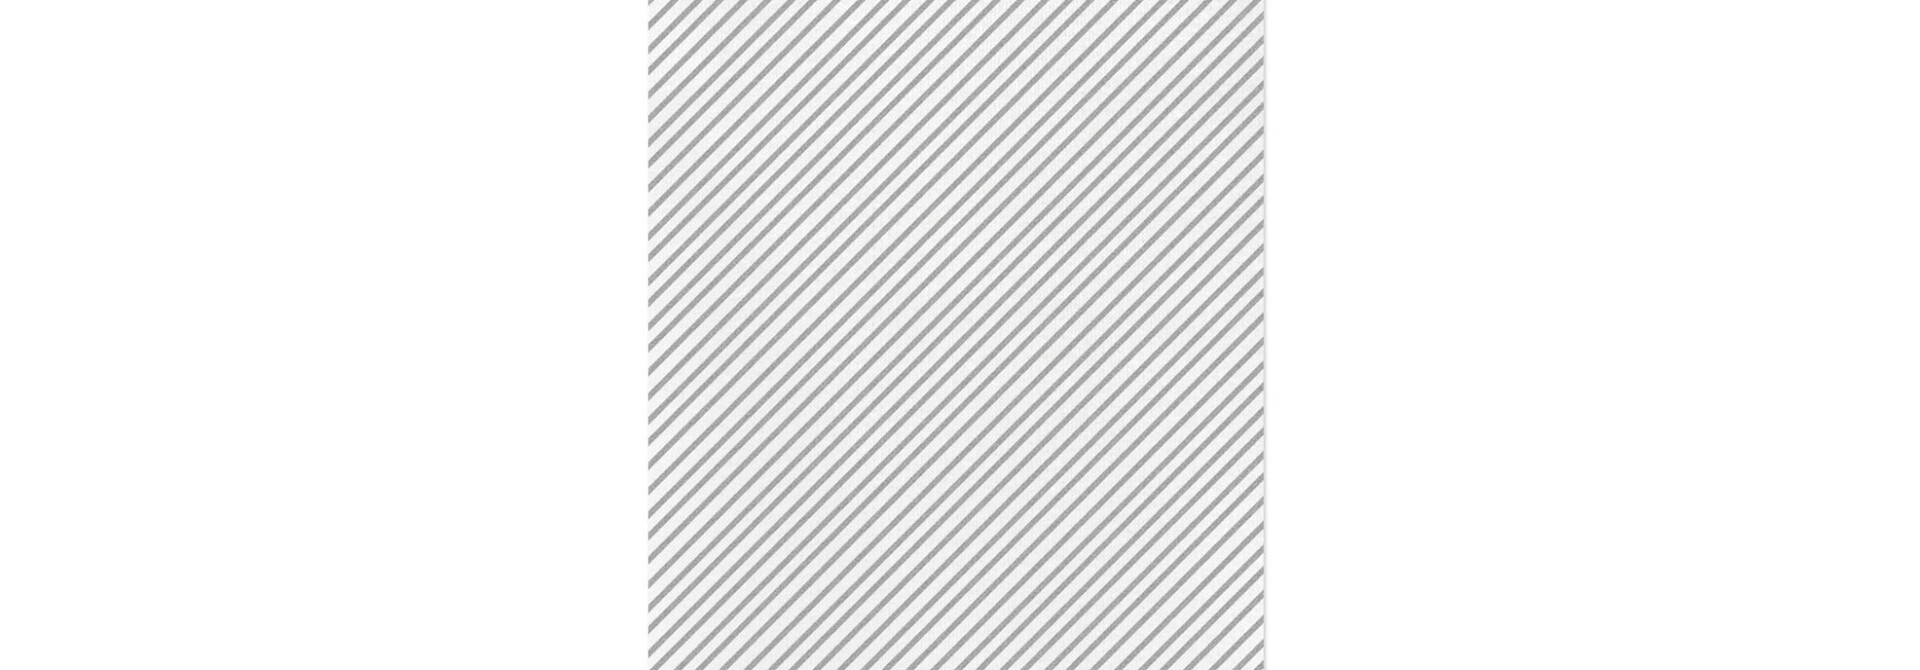 Seersucker Stripe | The Papersoft Guest Towel Collection Pack of 50, Light Gray